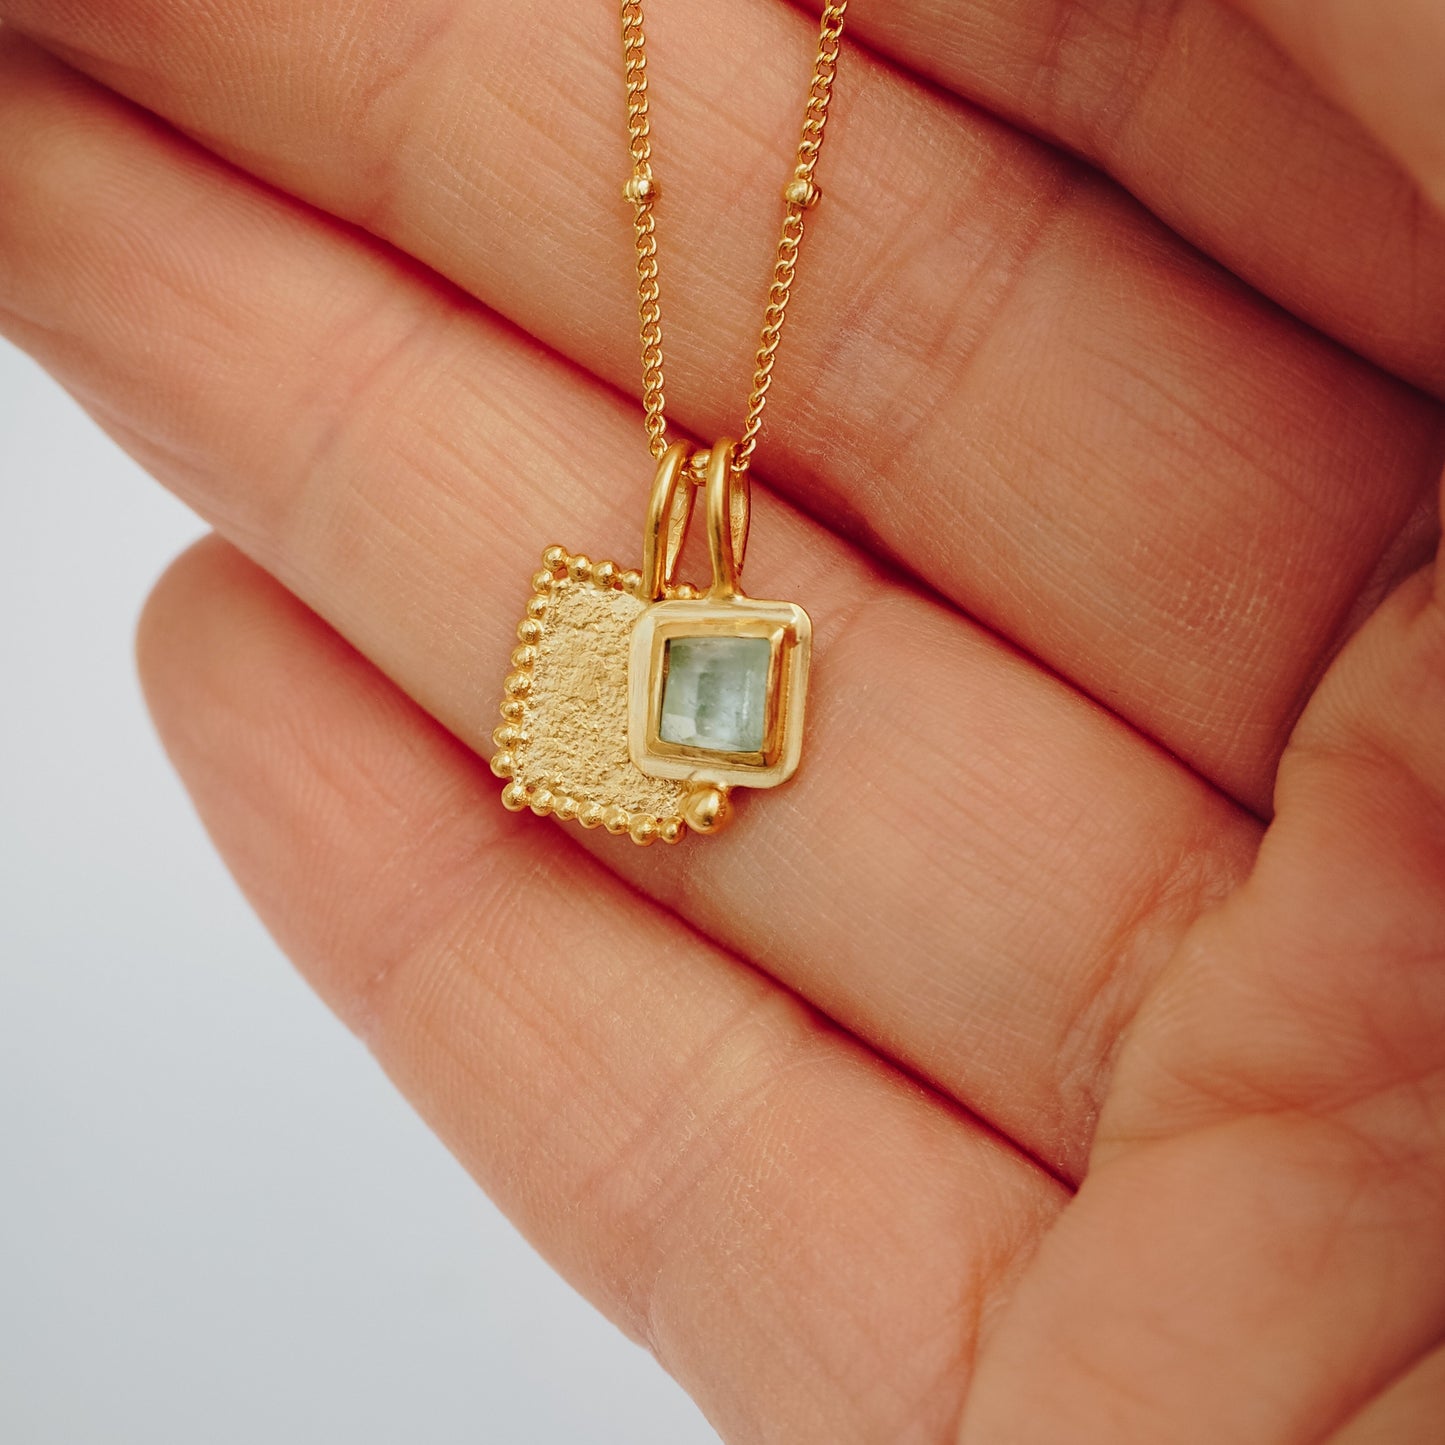 Square gold pendant adorned with a vibrant blue rose cut tourmaline gemstone and meticulous granulation work, hanging delicately from a satellite chain.